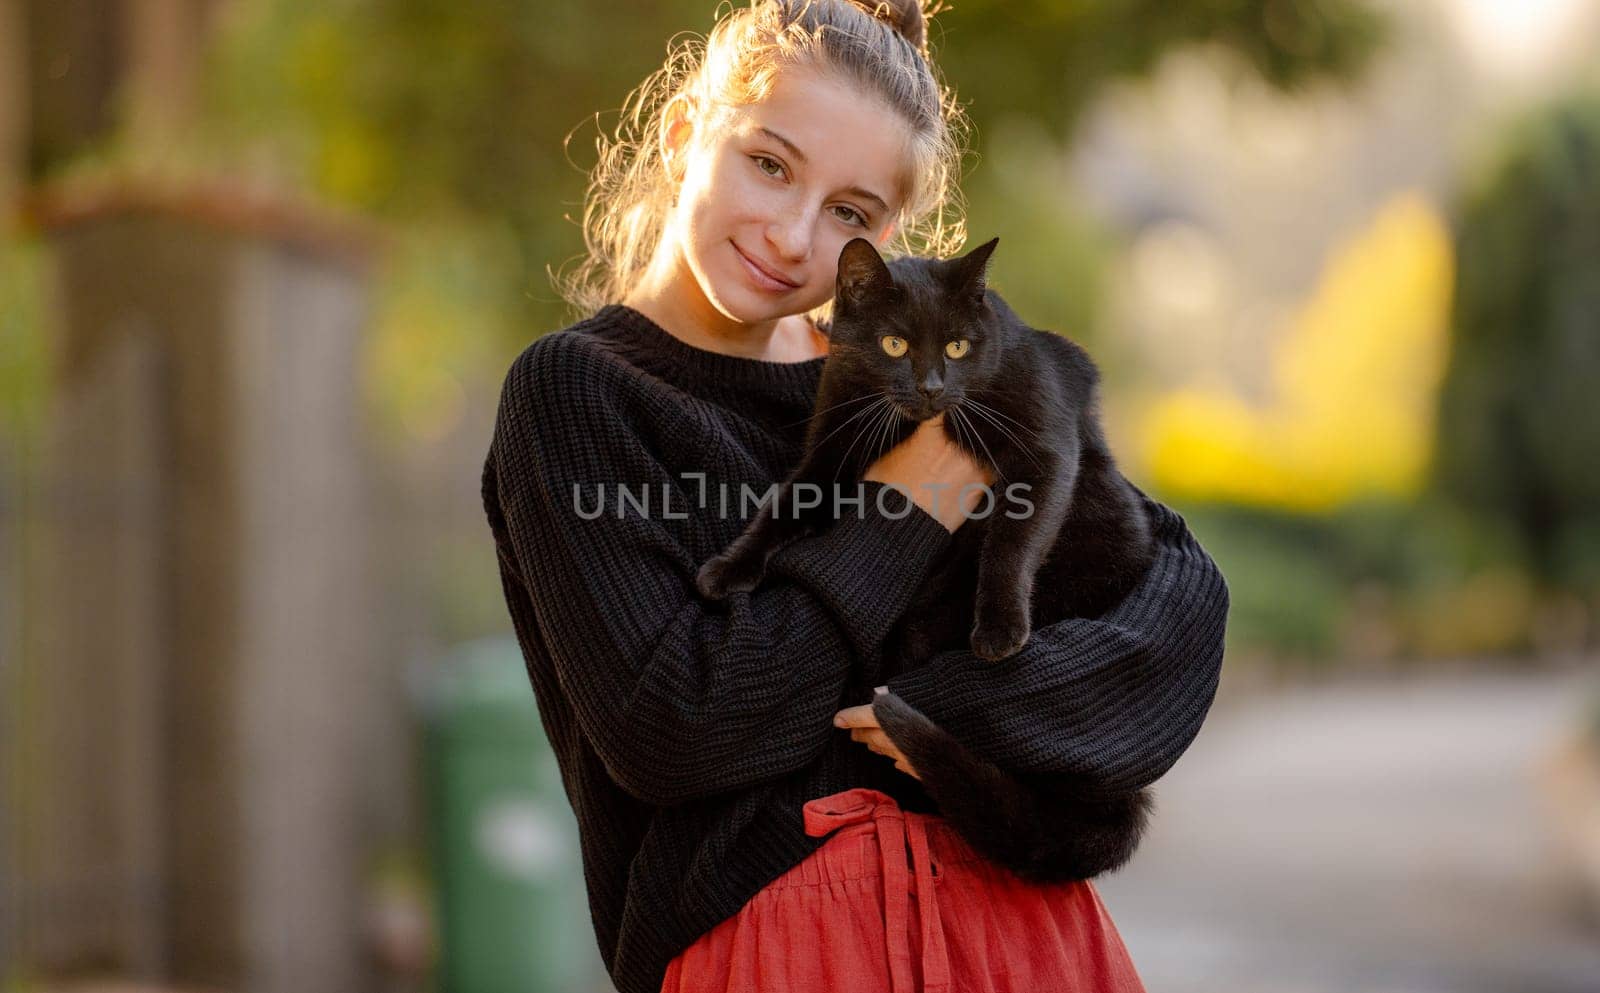 Pretty girl hugging black cat outdoors at street with autumn light. Beautiful model teenager holding feline animal at park